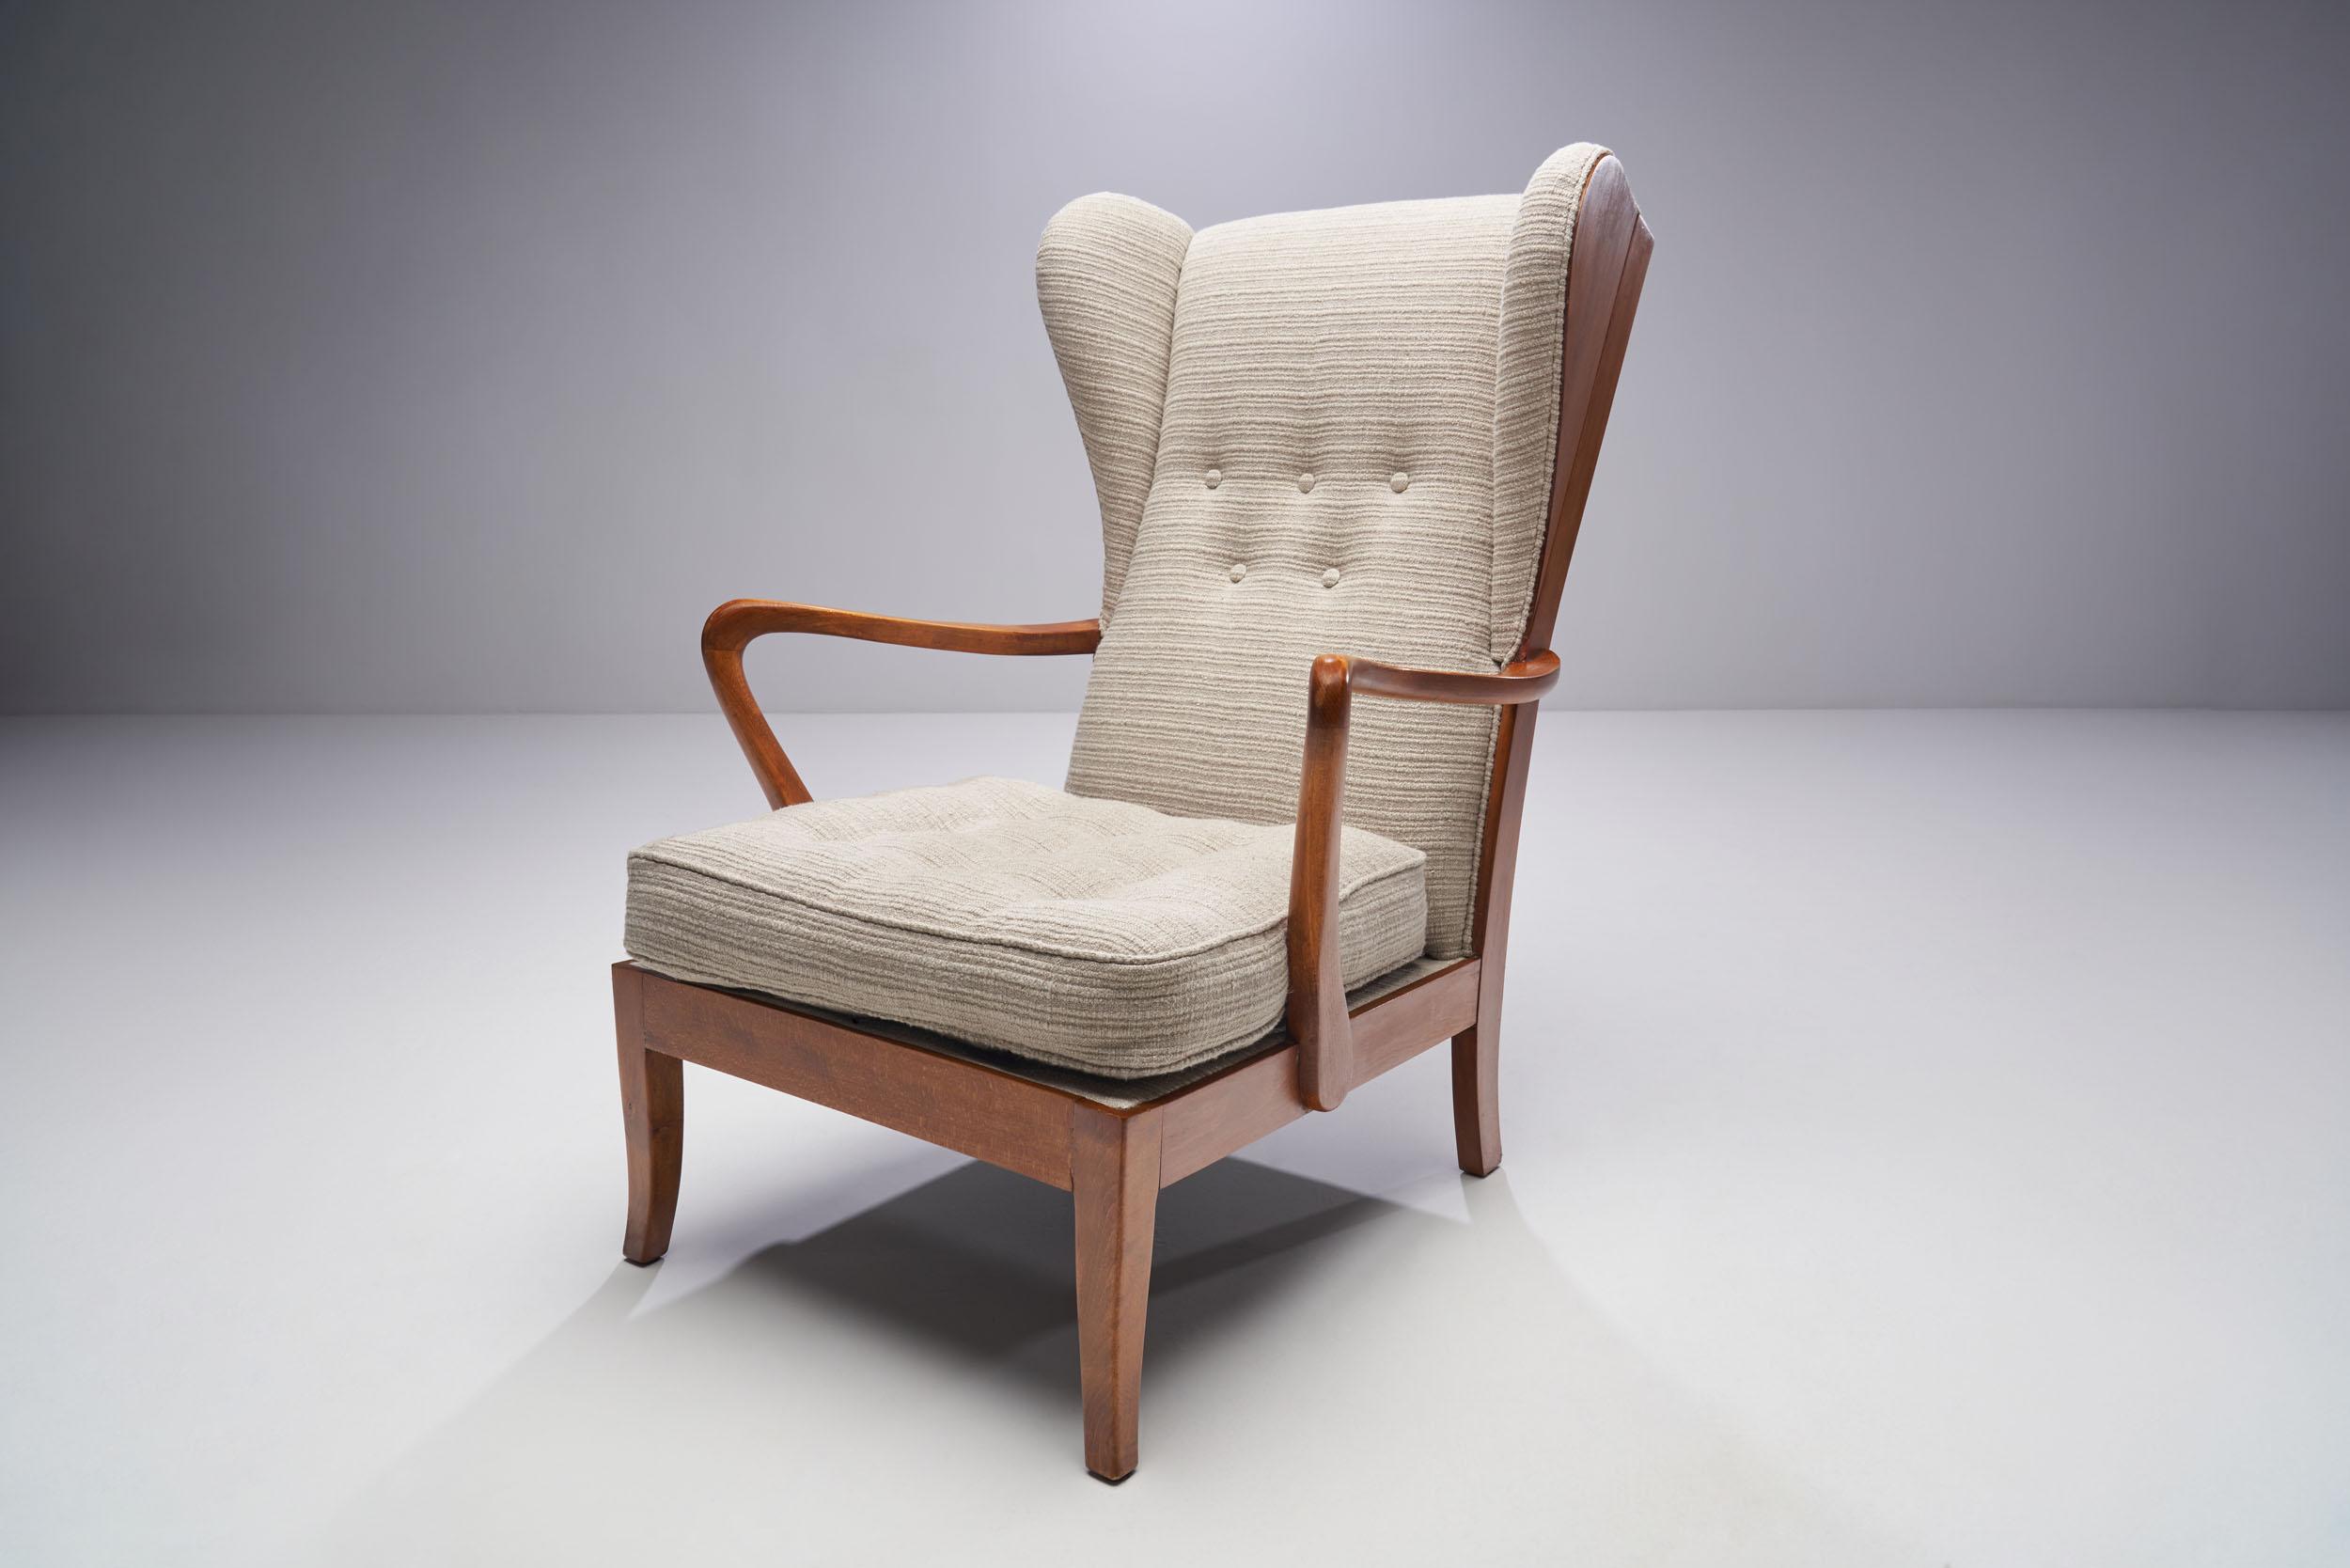 This Danish cabinetmaker chair often referred to as “Øreklapstolen” or “ear flap chair” is a great example of the Danish Mid-Century Modern aesthetic.

Danish design is torn between epochs; it is a term that accommodates both the functional